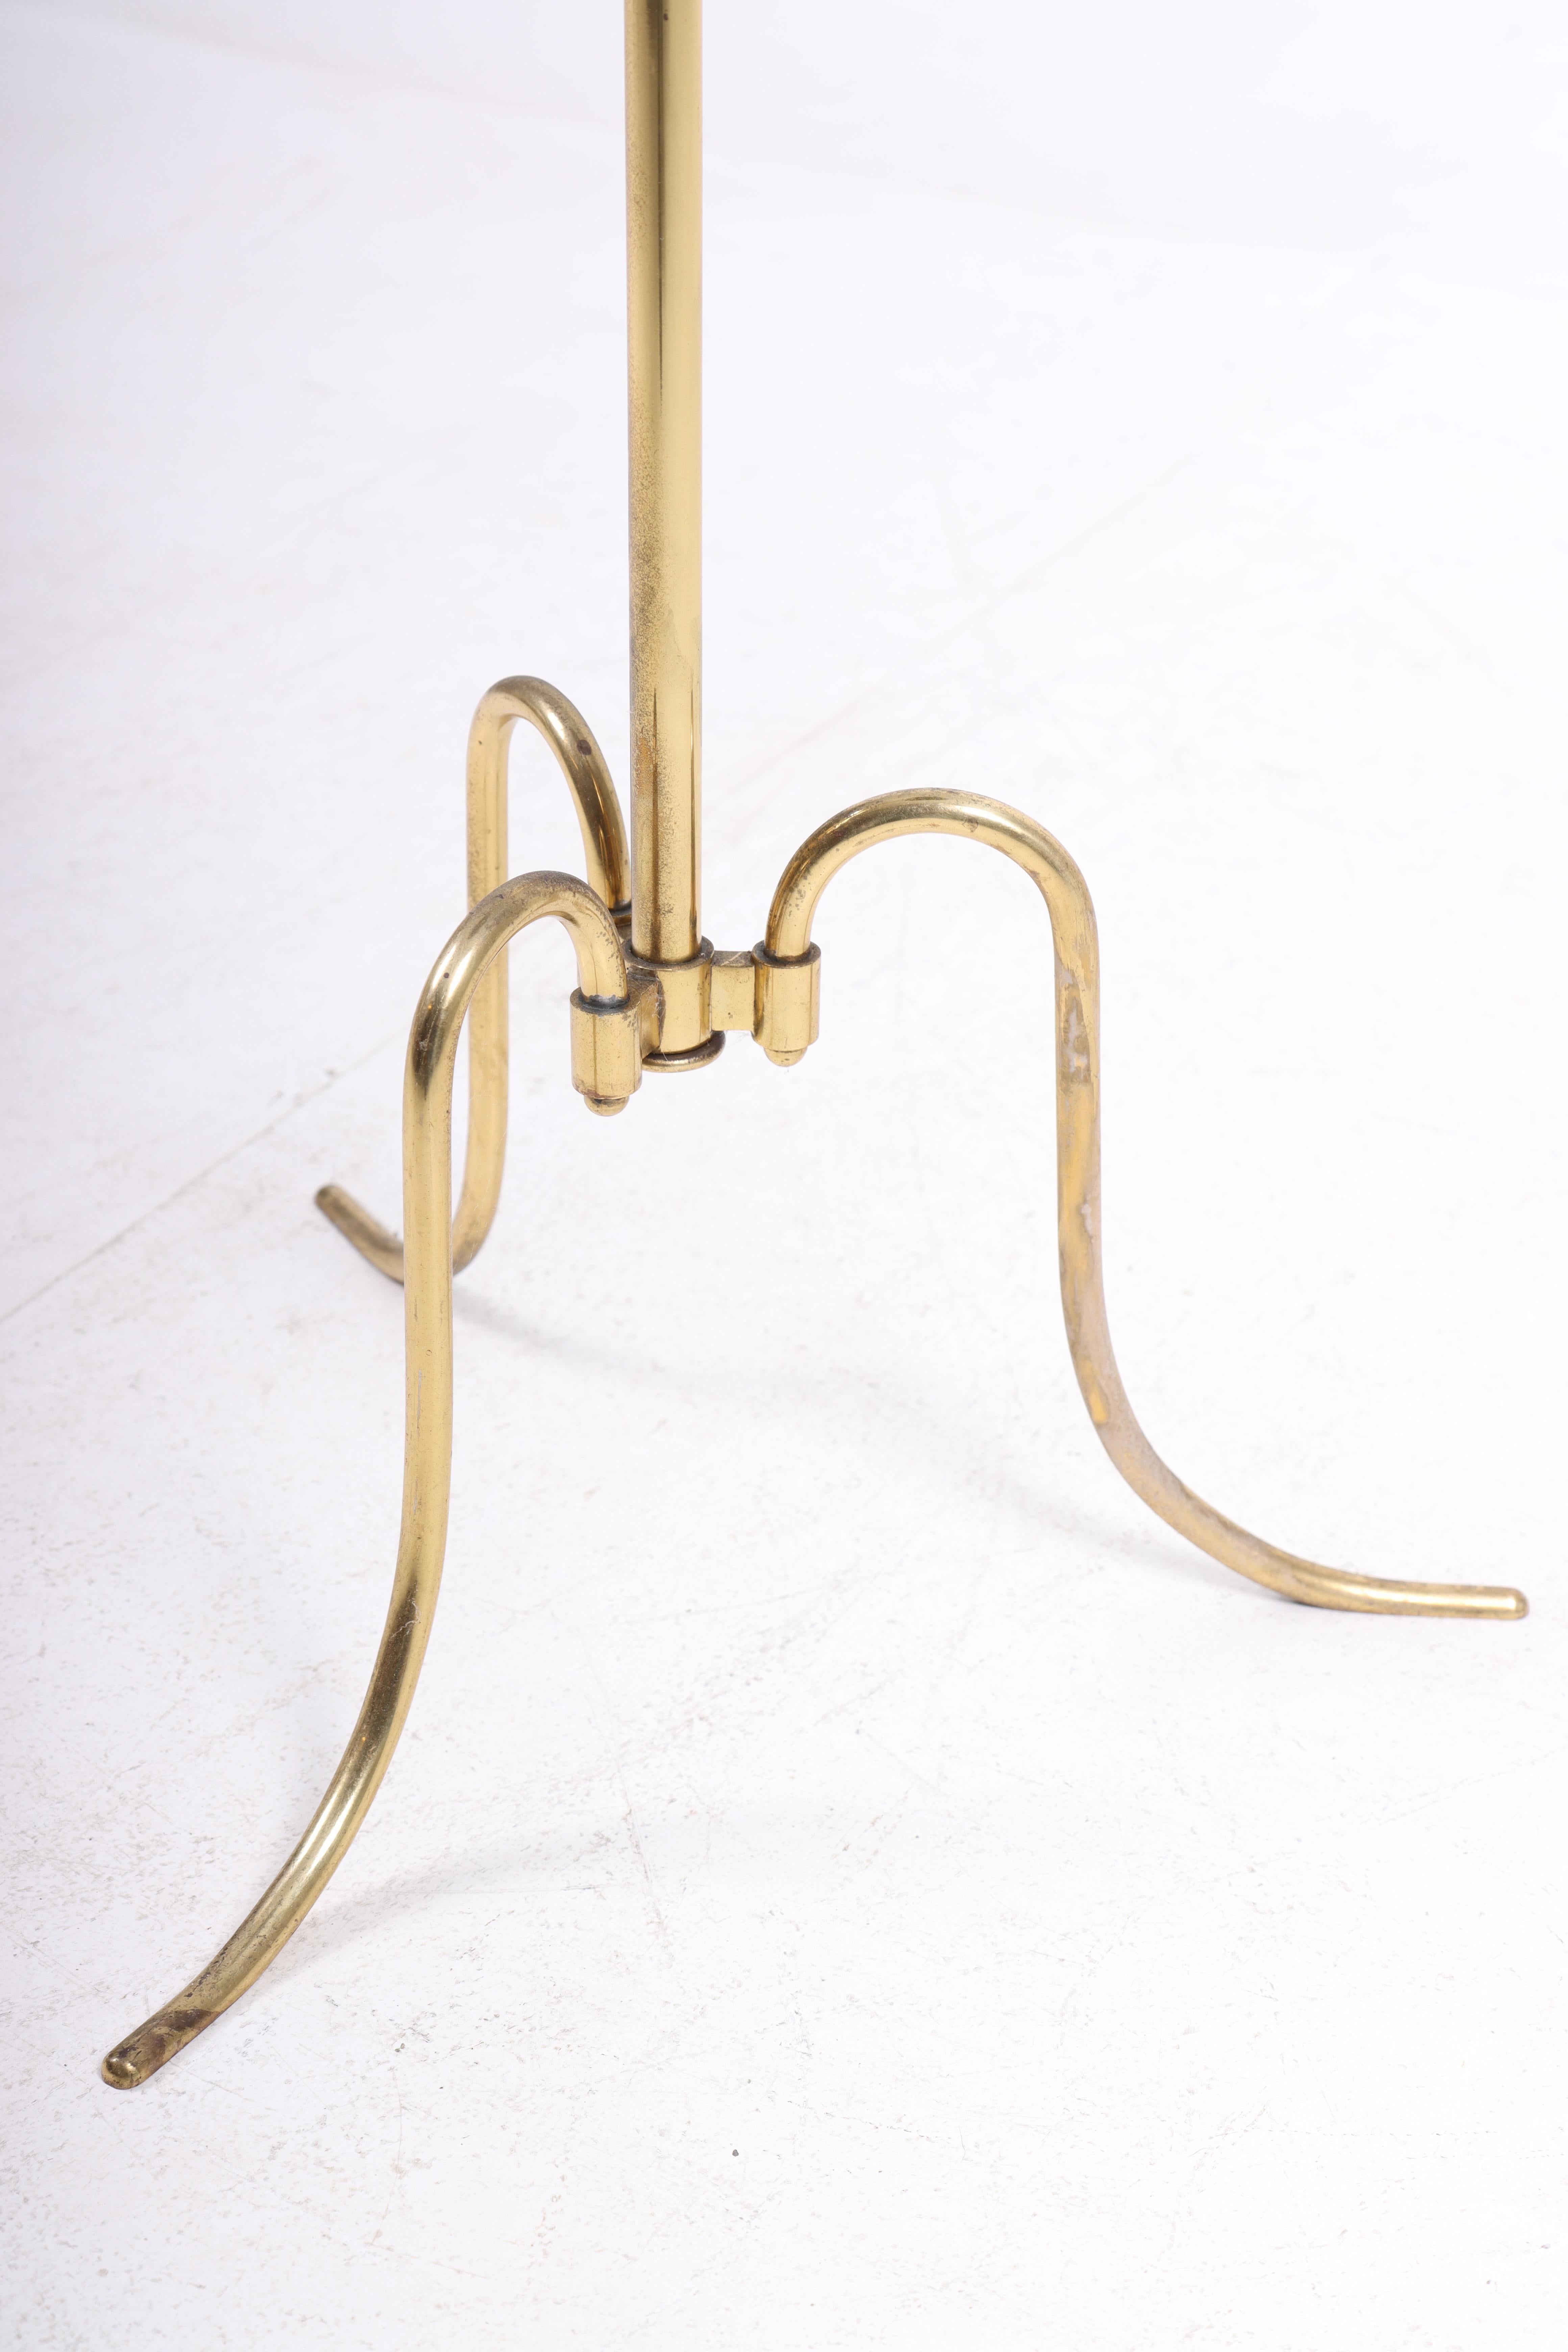 Danish floor light in patinated brass, adjustable height. Designed and made for Lysberg Hansen & Terp in the 1940s-1950s. Original condition.